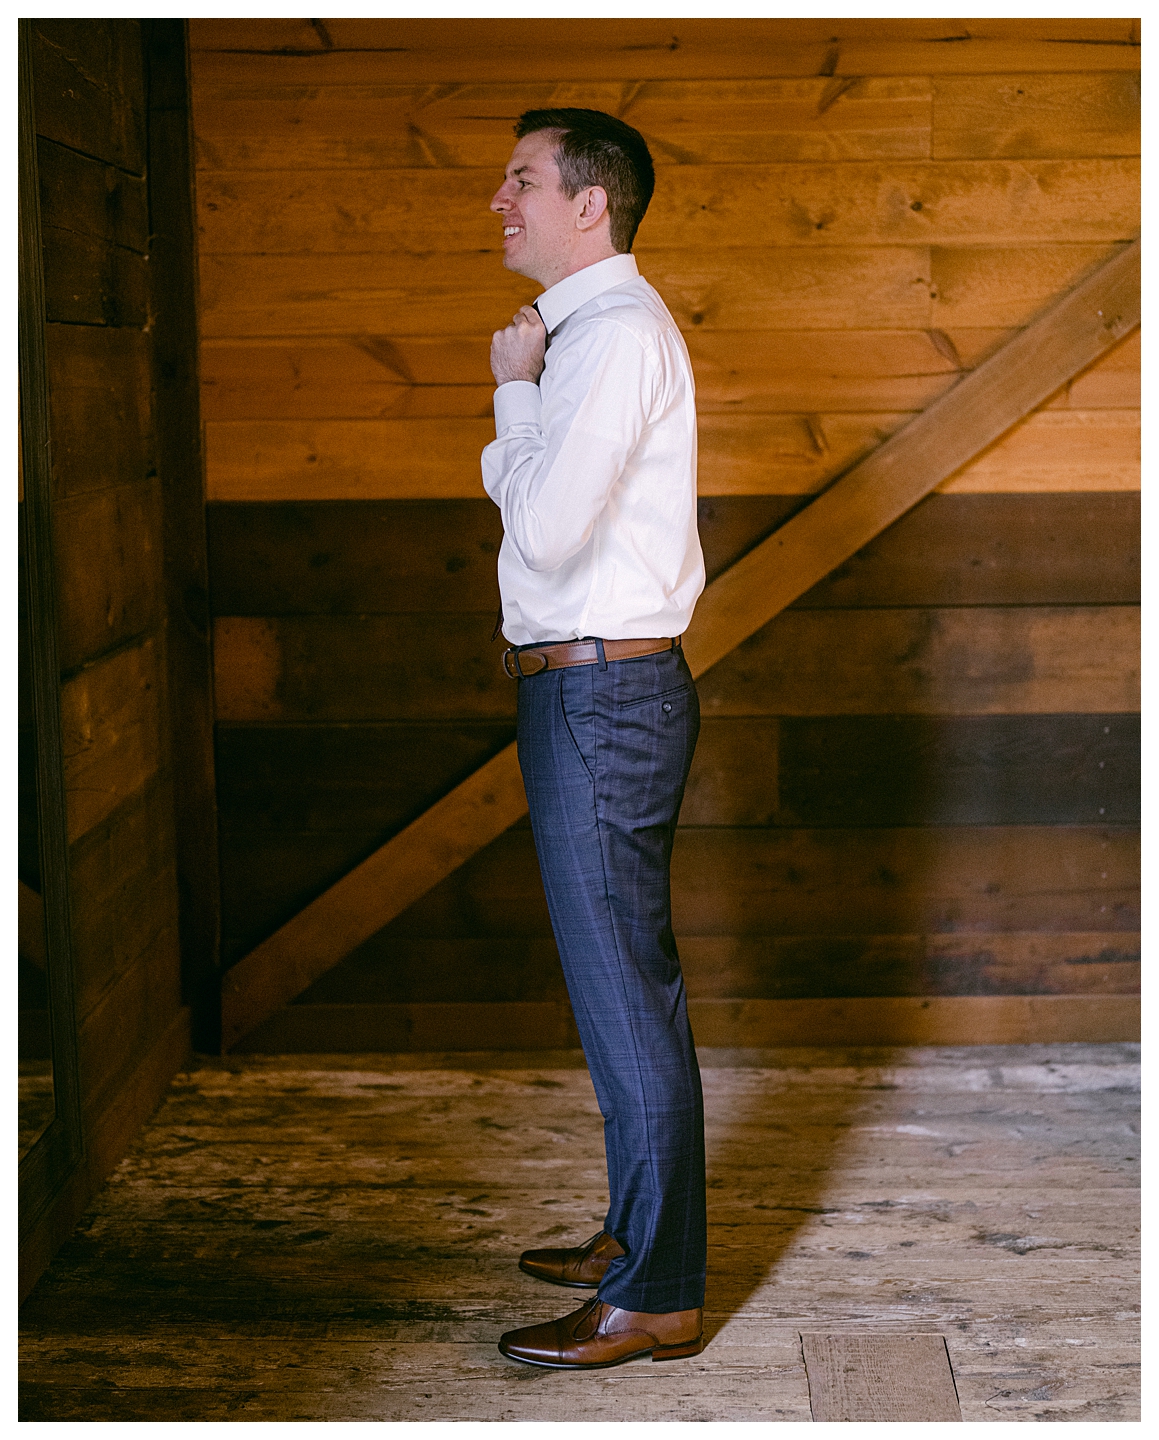 A groom getting ready in the barn at a Mayowood Stone Barn Wedding. Photo by Kayla Lee.